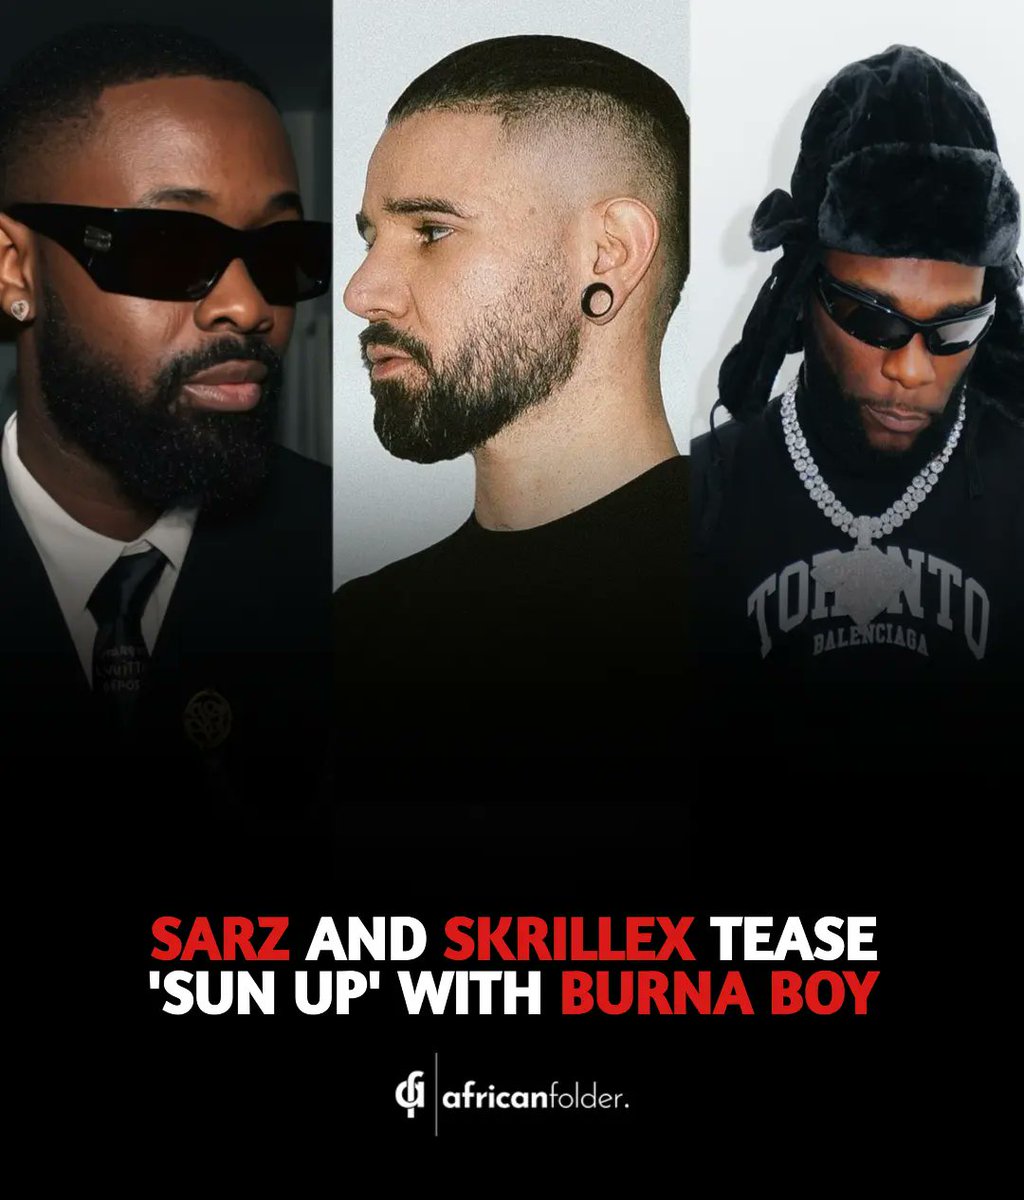 Sarz and Skrillez tease their song with Burna Boy titled 'Sun Up'. 🎶 Check thread for snippets